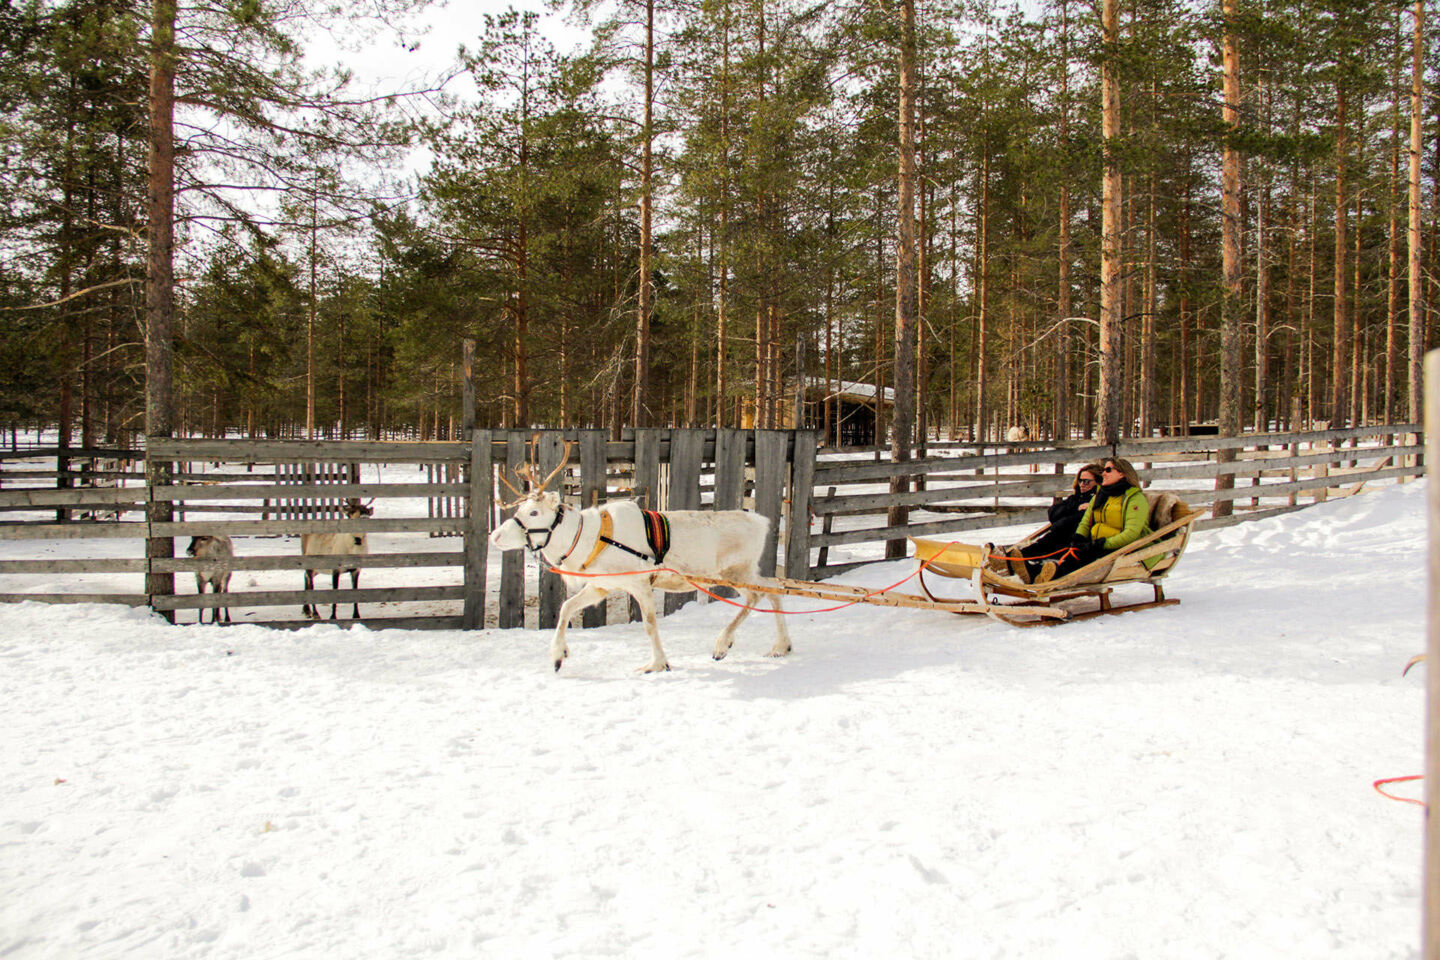 On a fam trip to Finnish Lapland in spring 2018